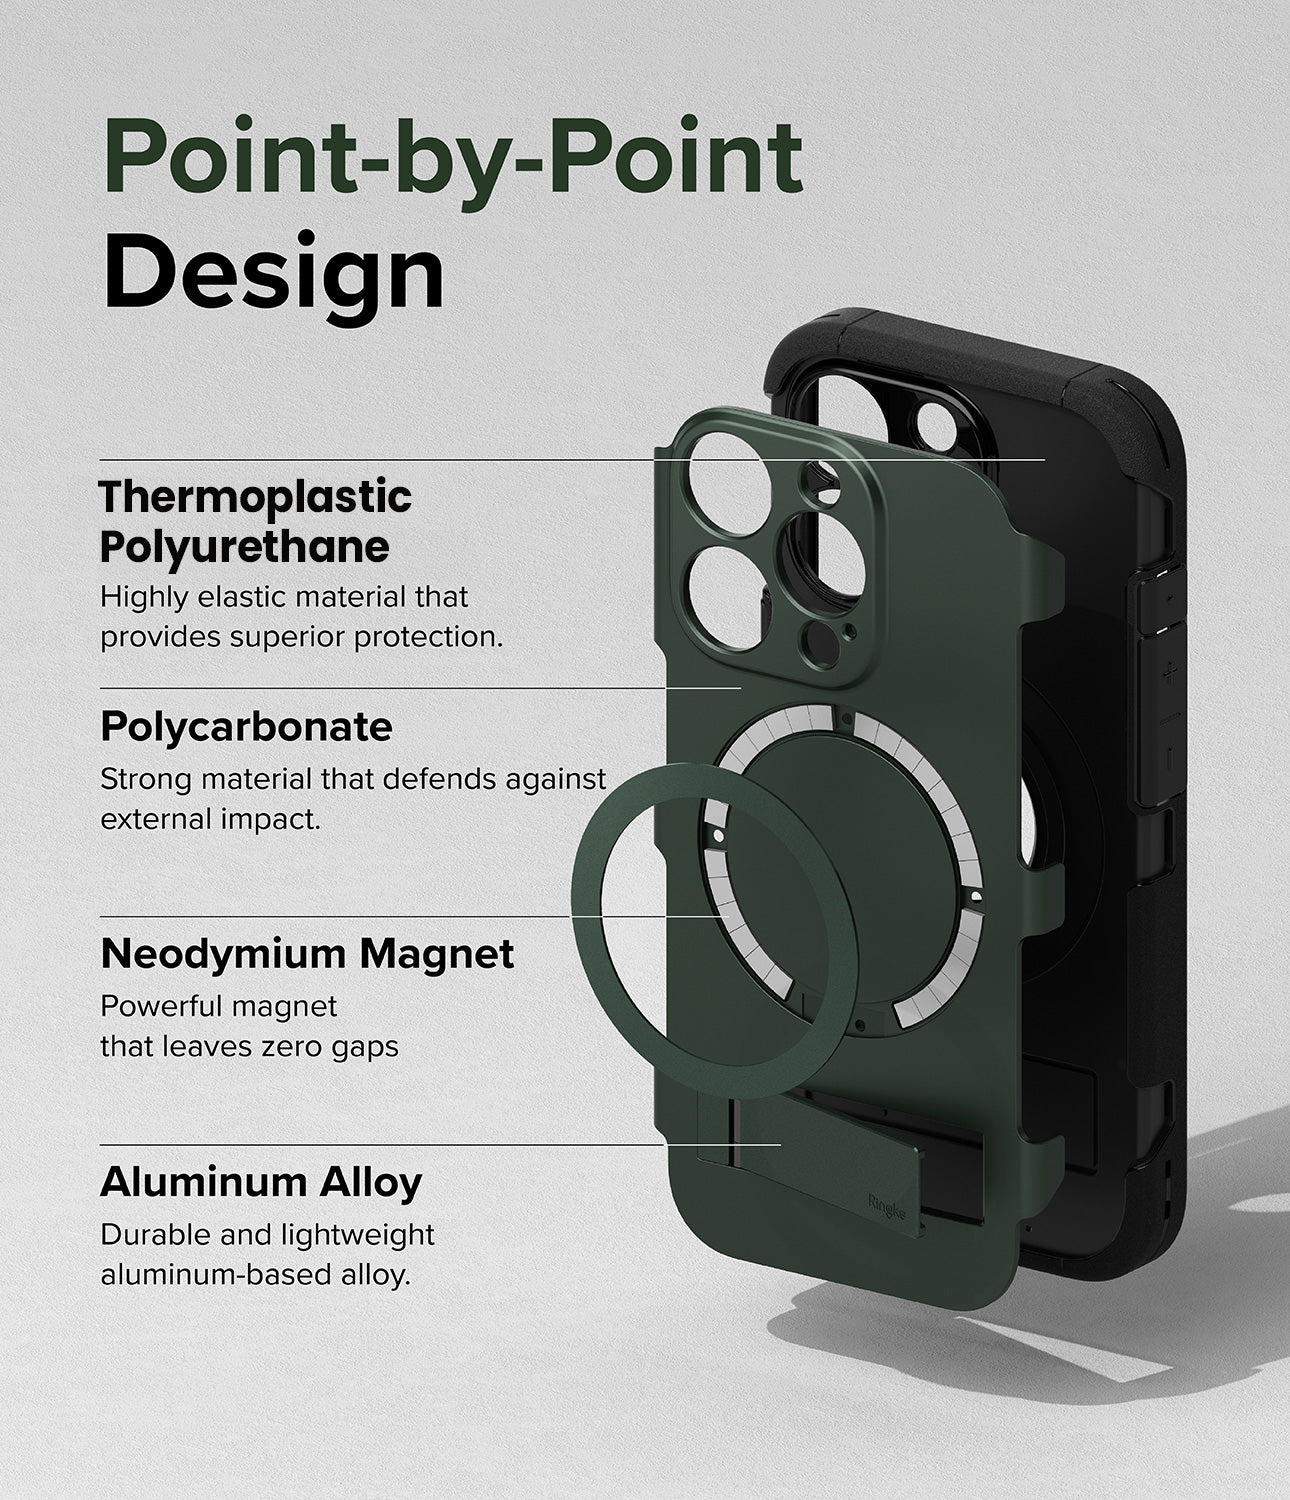 iPhone 15 Pro Case | Alles - Dark Green - Point-By-Point Design. Highly elastic material that provides superior protection with Thermoplastic Polyurethane. Strong material that defends against external impact with Polycarbonate. Powerful Neodymium Magnet that leaves zero gaps. Durable and lightweight aluminum-based alloy.